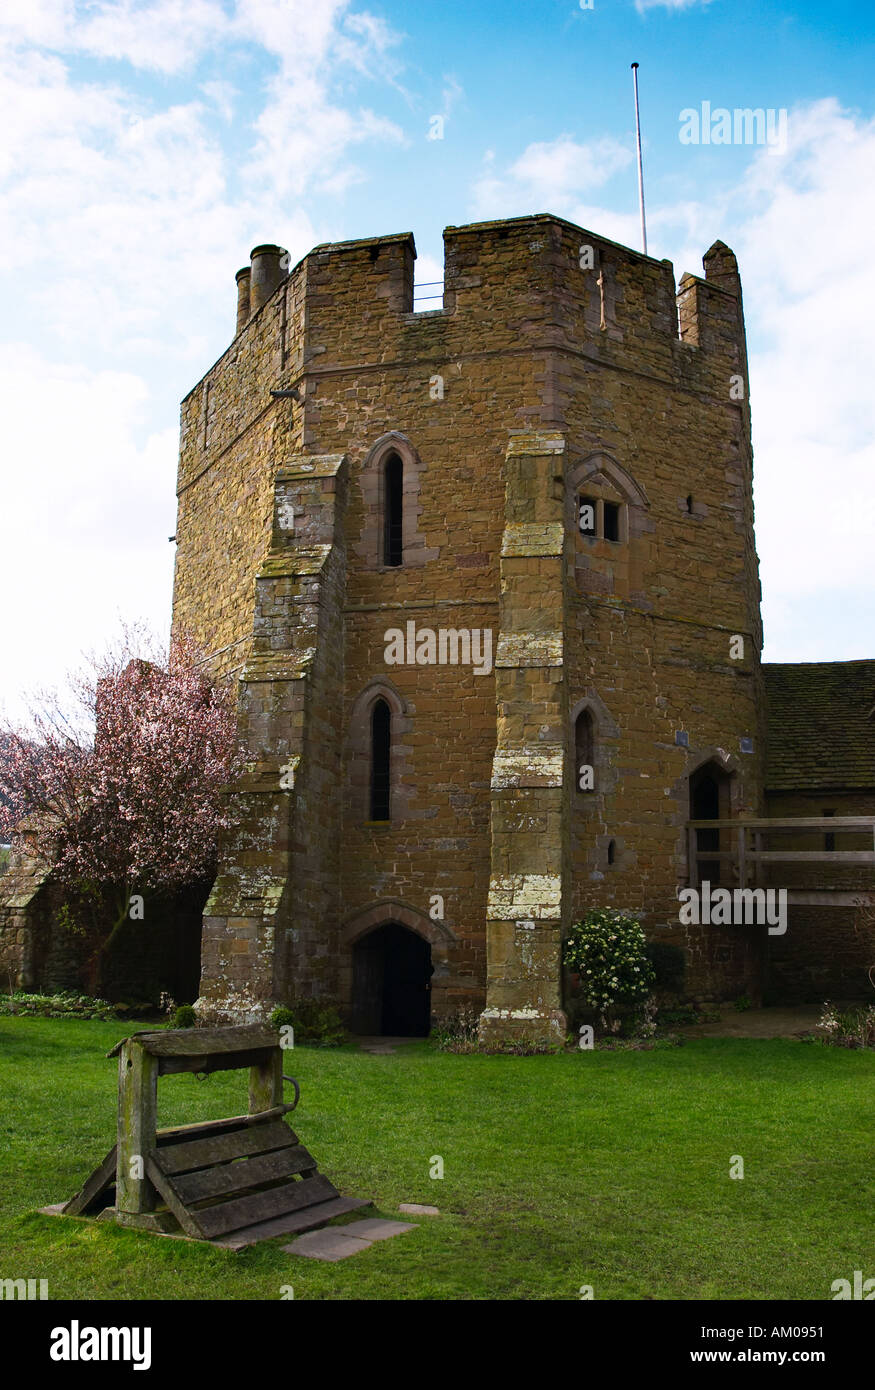 Stokesay Castle Shropshire England South tower 2004 Stock Photo